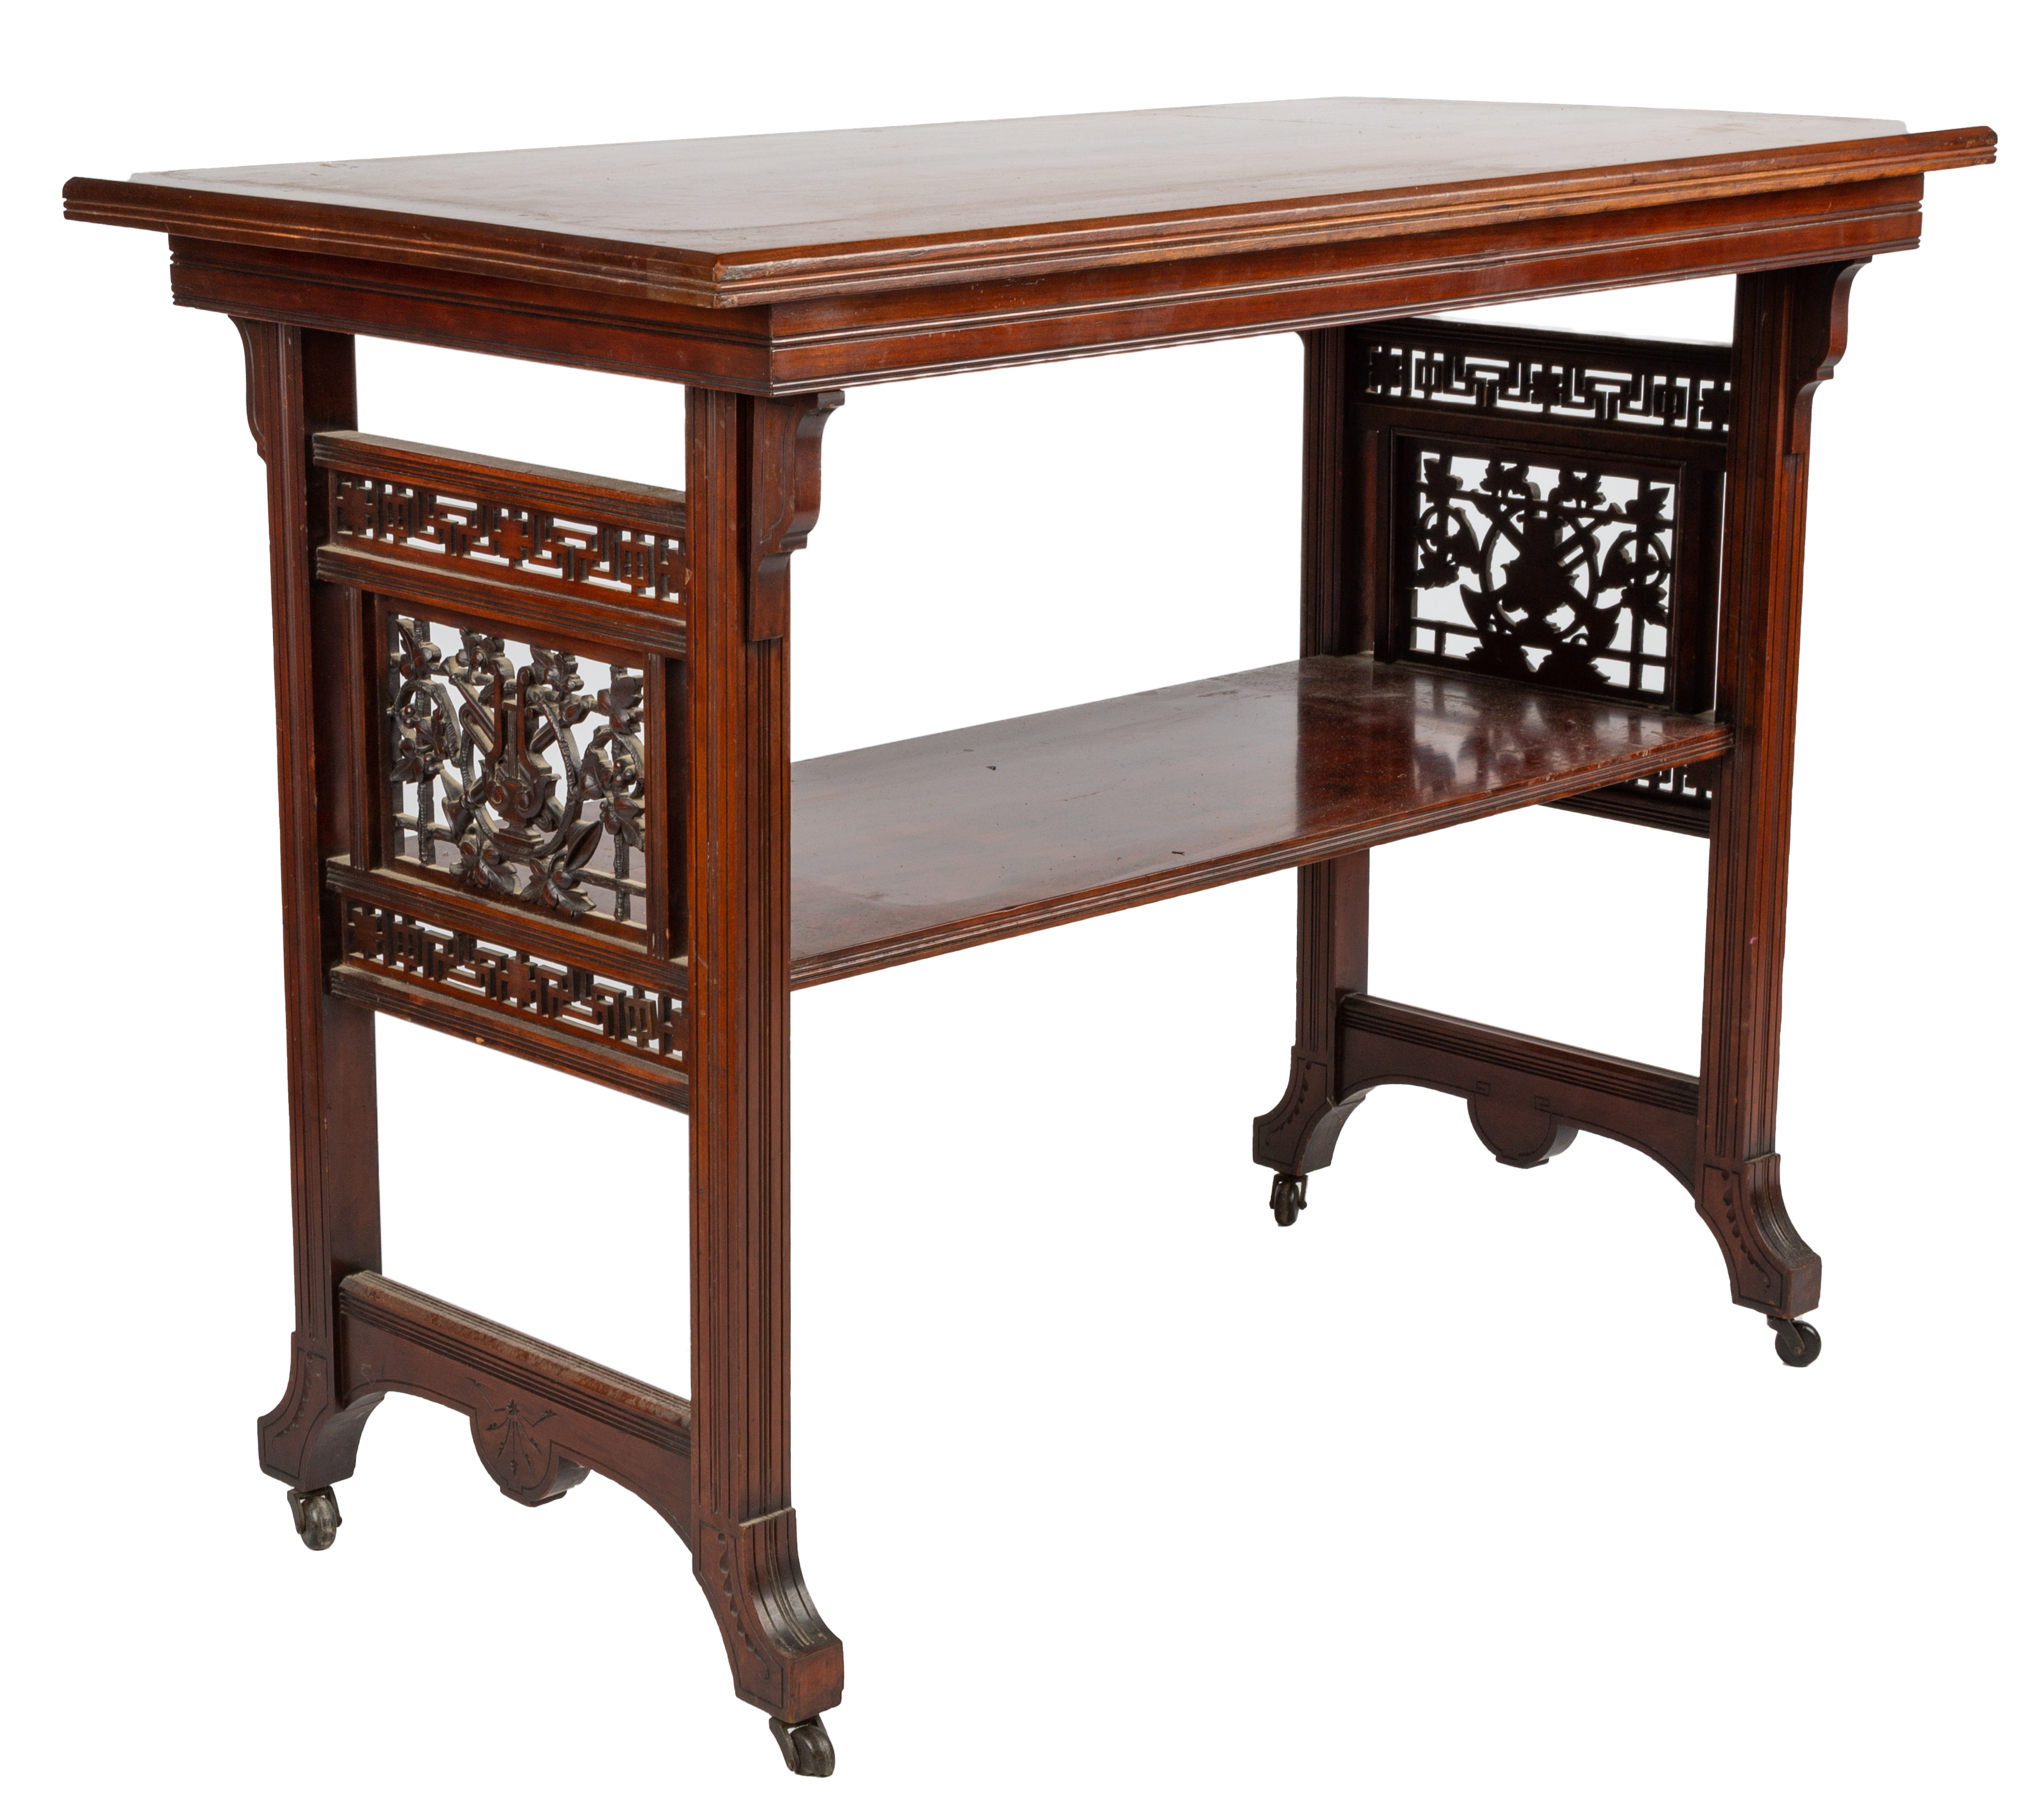 AESTHETIC CARVED CHERRY SIDE TABLE 2c8711